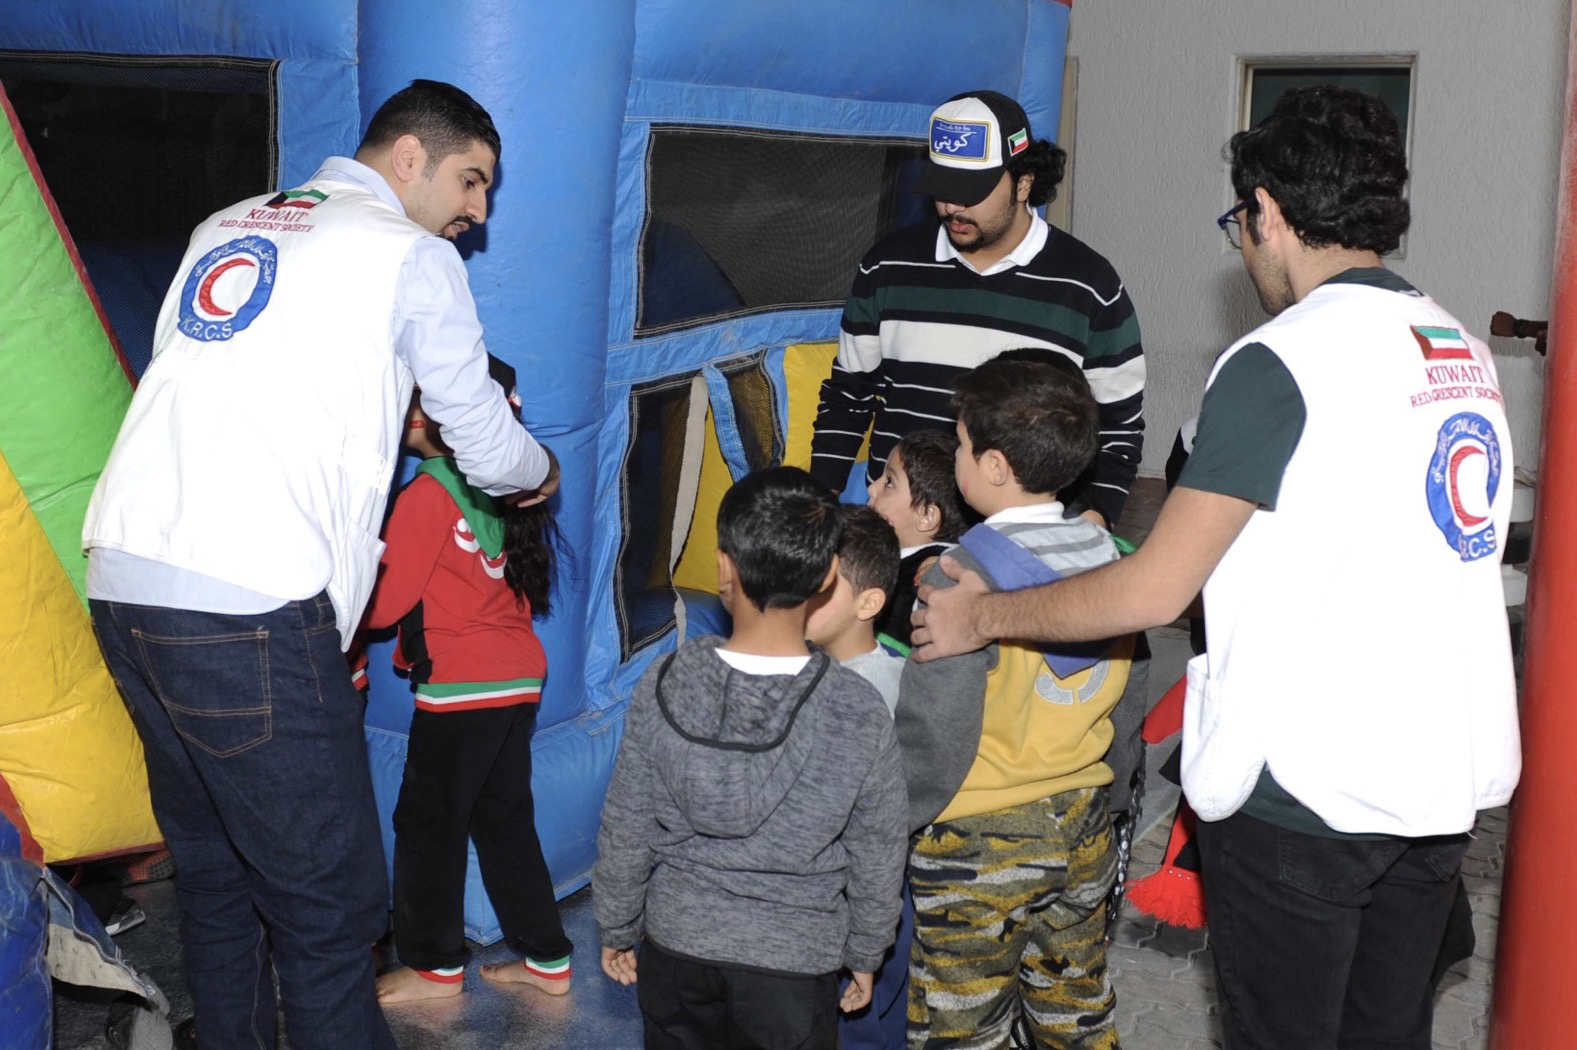 Kuwait Red Crescent Society's organizes charity for needy families, children